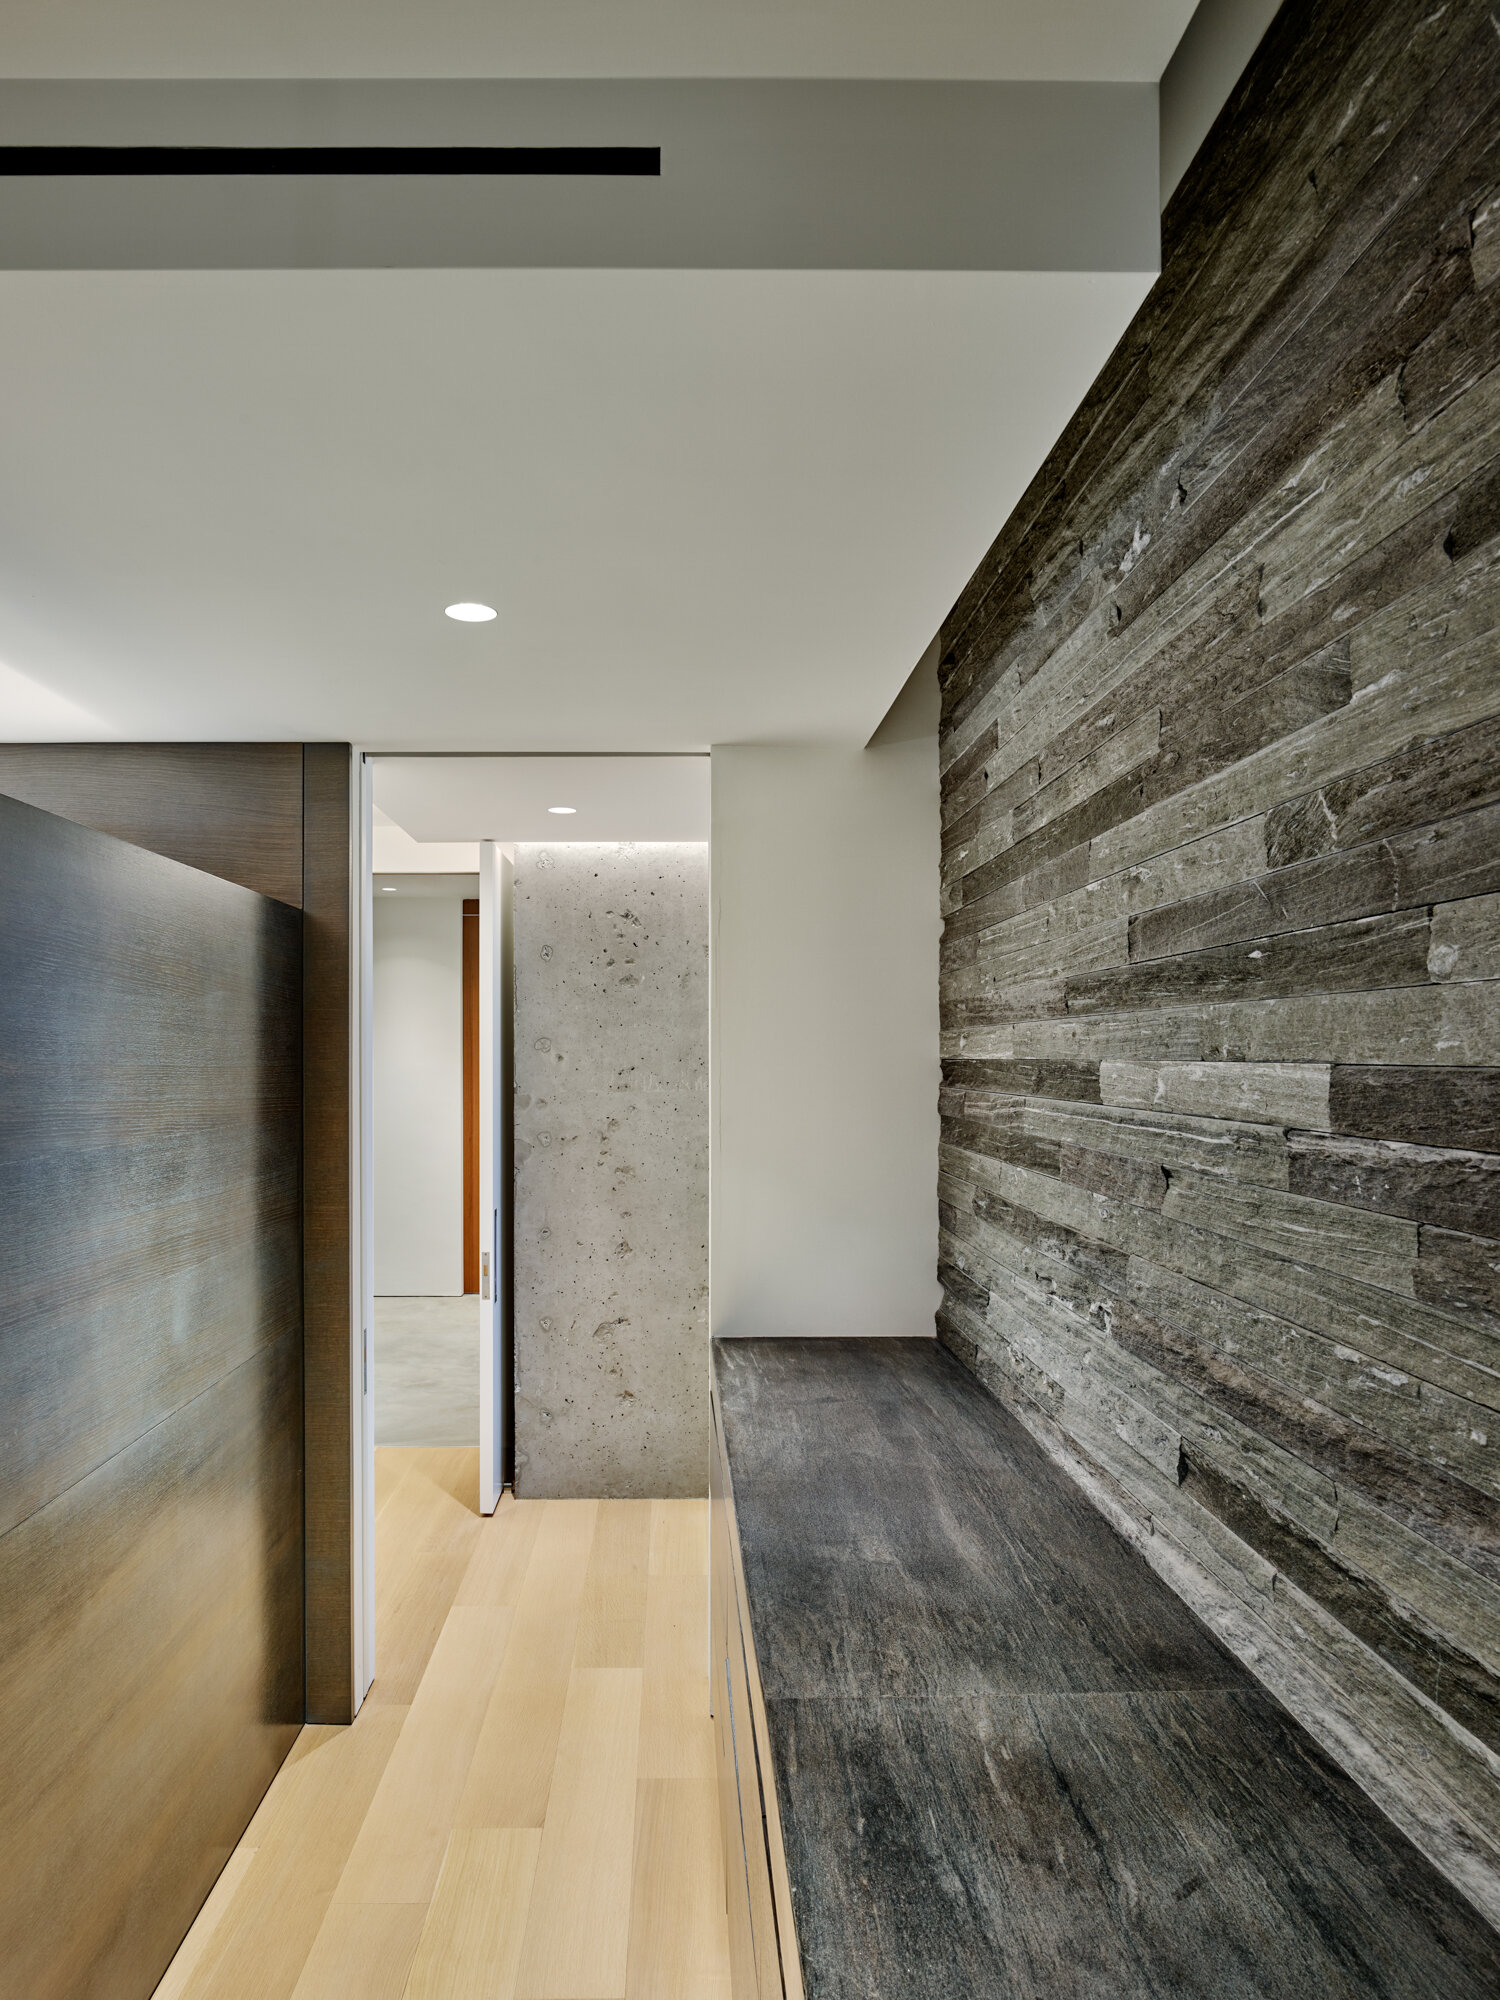 Cecil Baker + Partners - Rittenhouse Sq. Residence